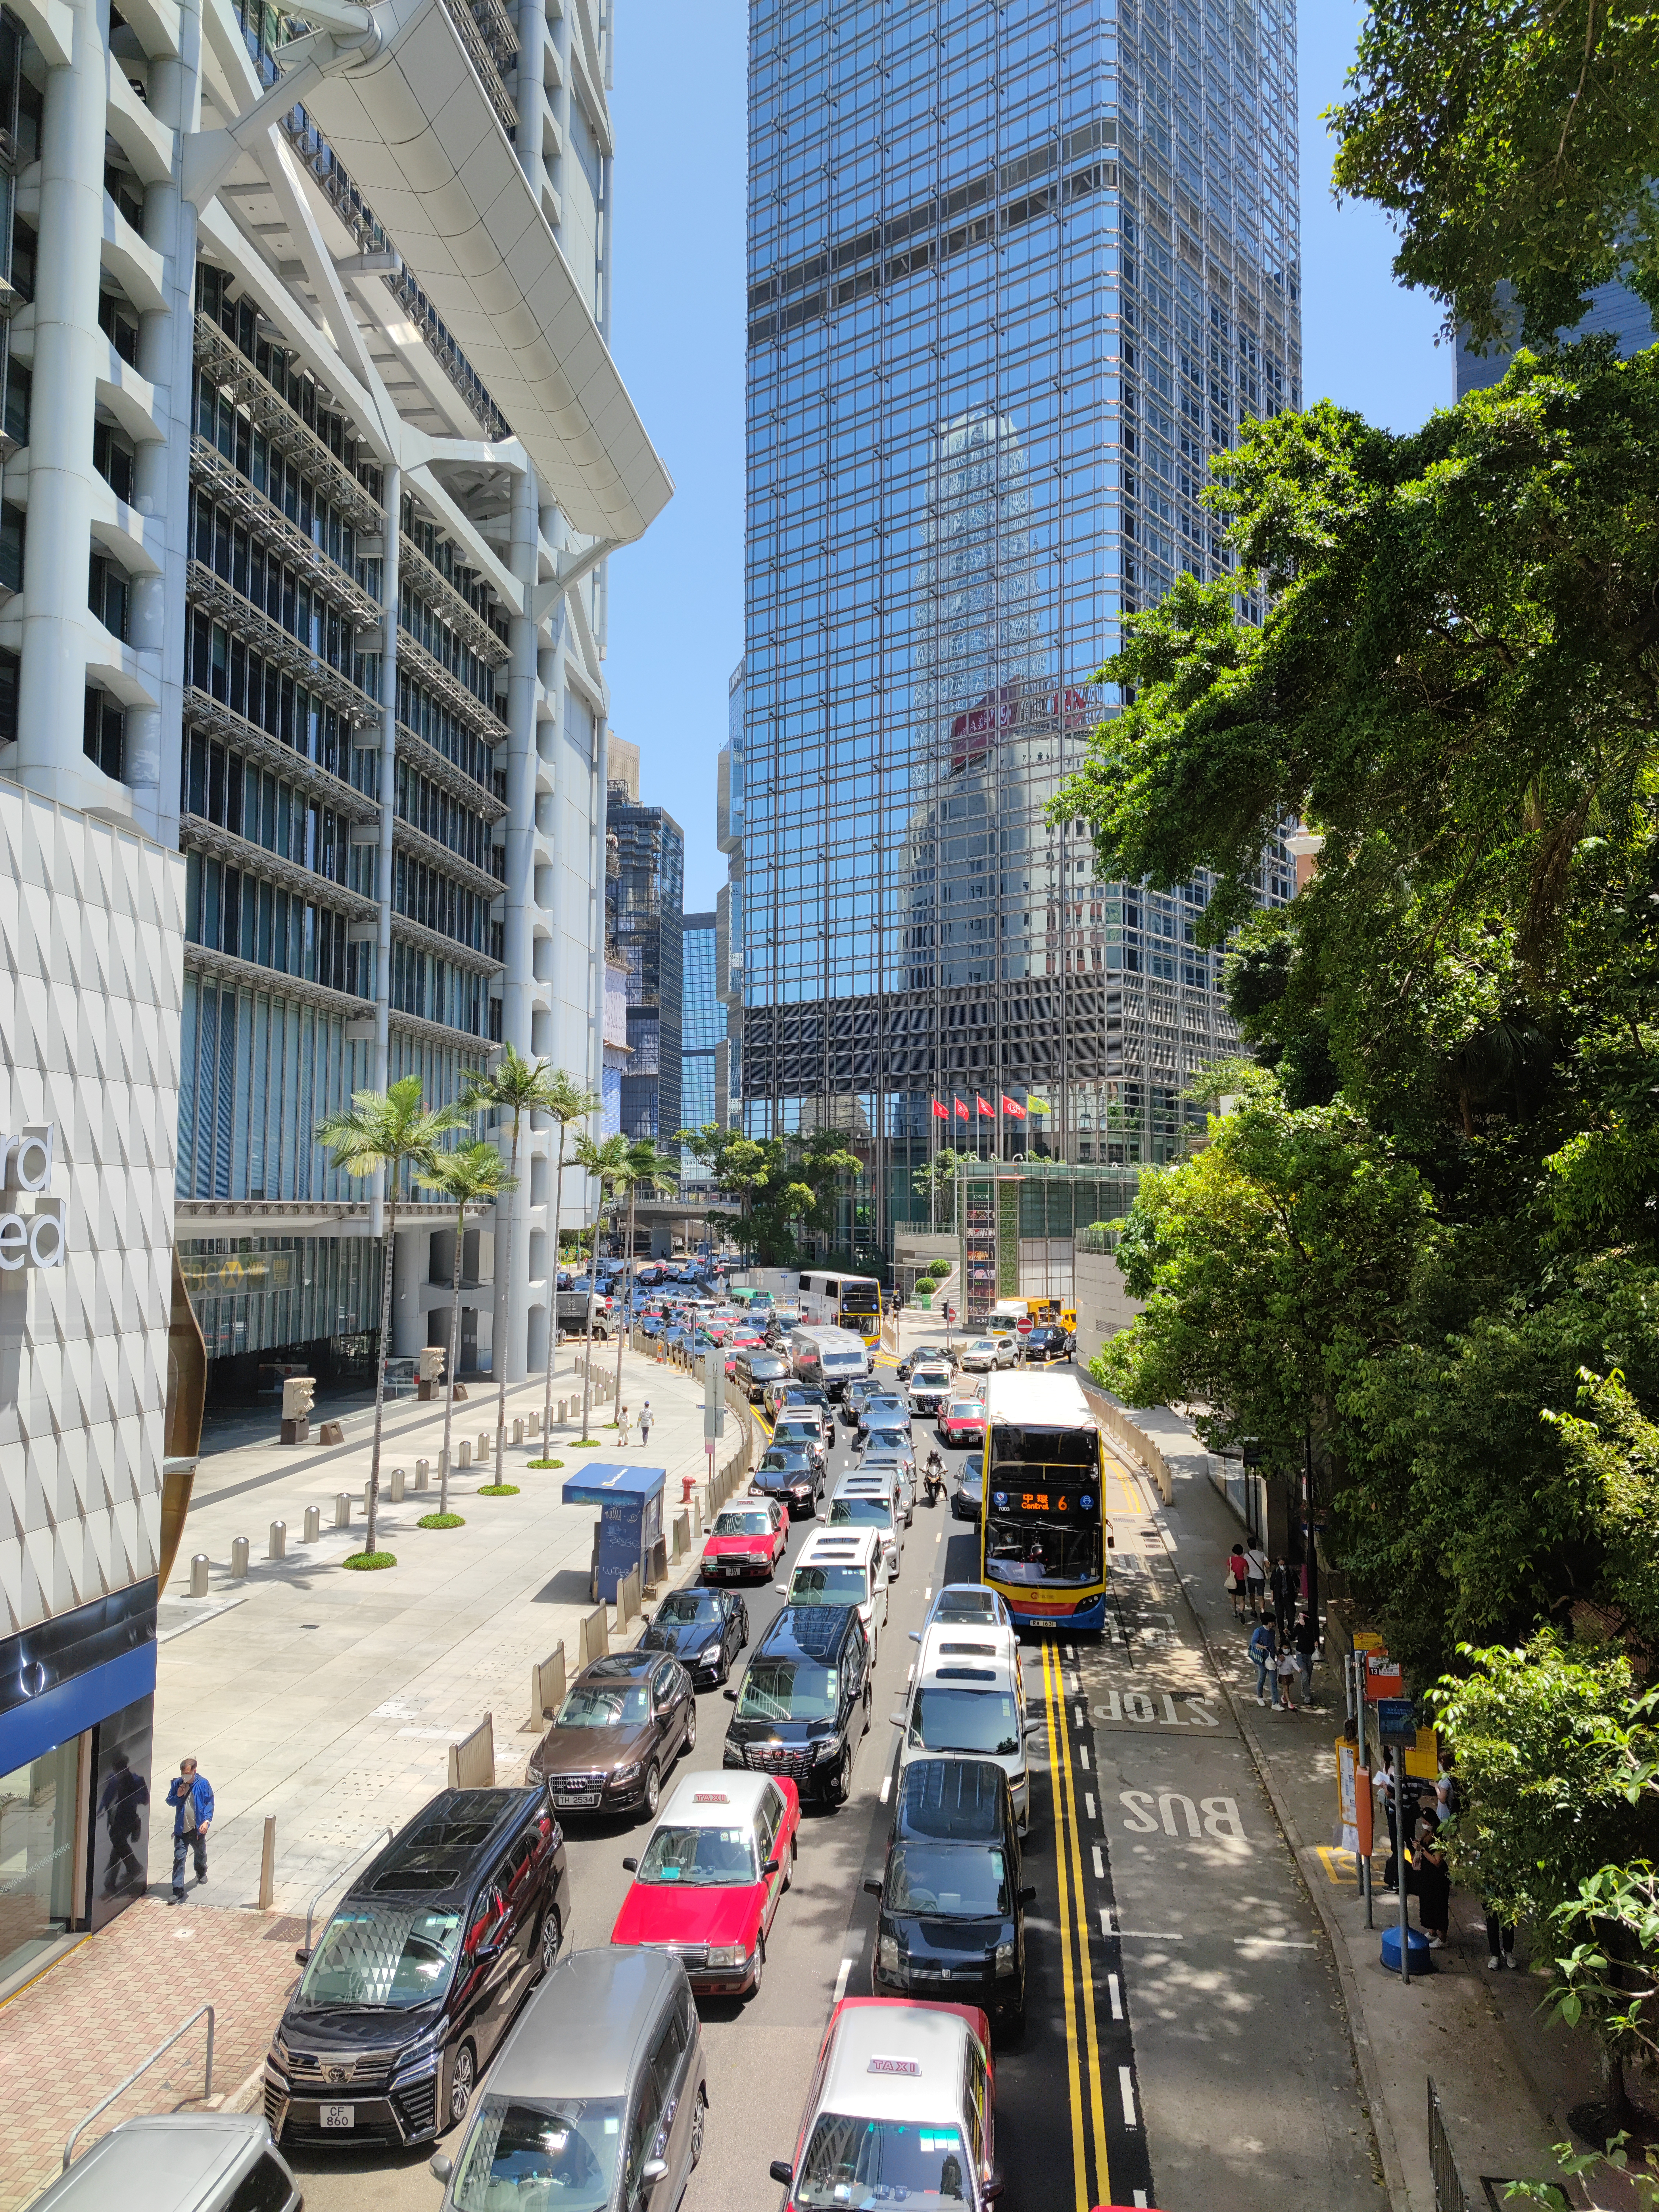 One of the main road in Central District, the CBD (Central business district), downtown in Hong Kong, on a working day, with typical busy road traffic and traffic congestion as the Covid 19 pandemic prevalence has eased. The HSBC Main Building of the Hong Kong and Shanghai Banking Corporation is on the left.